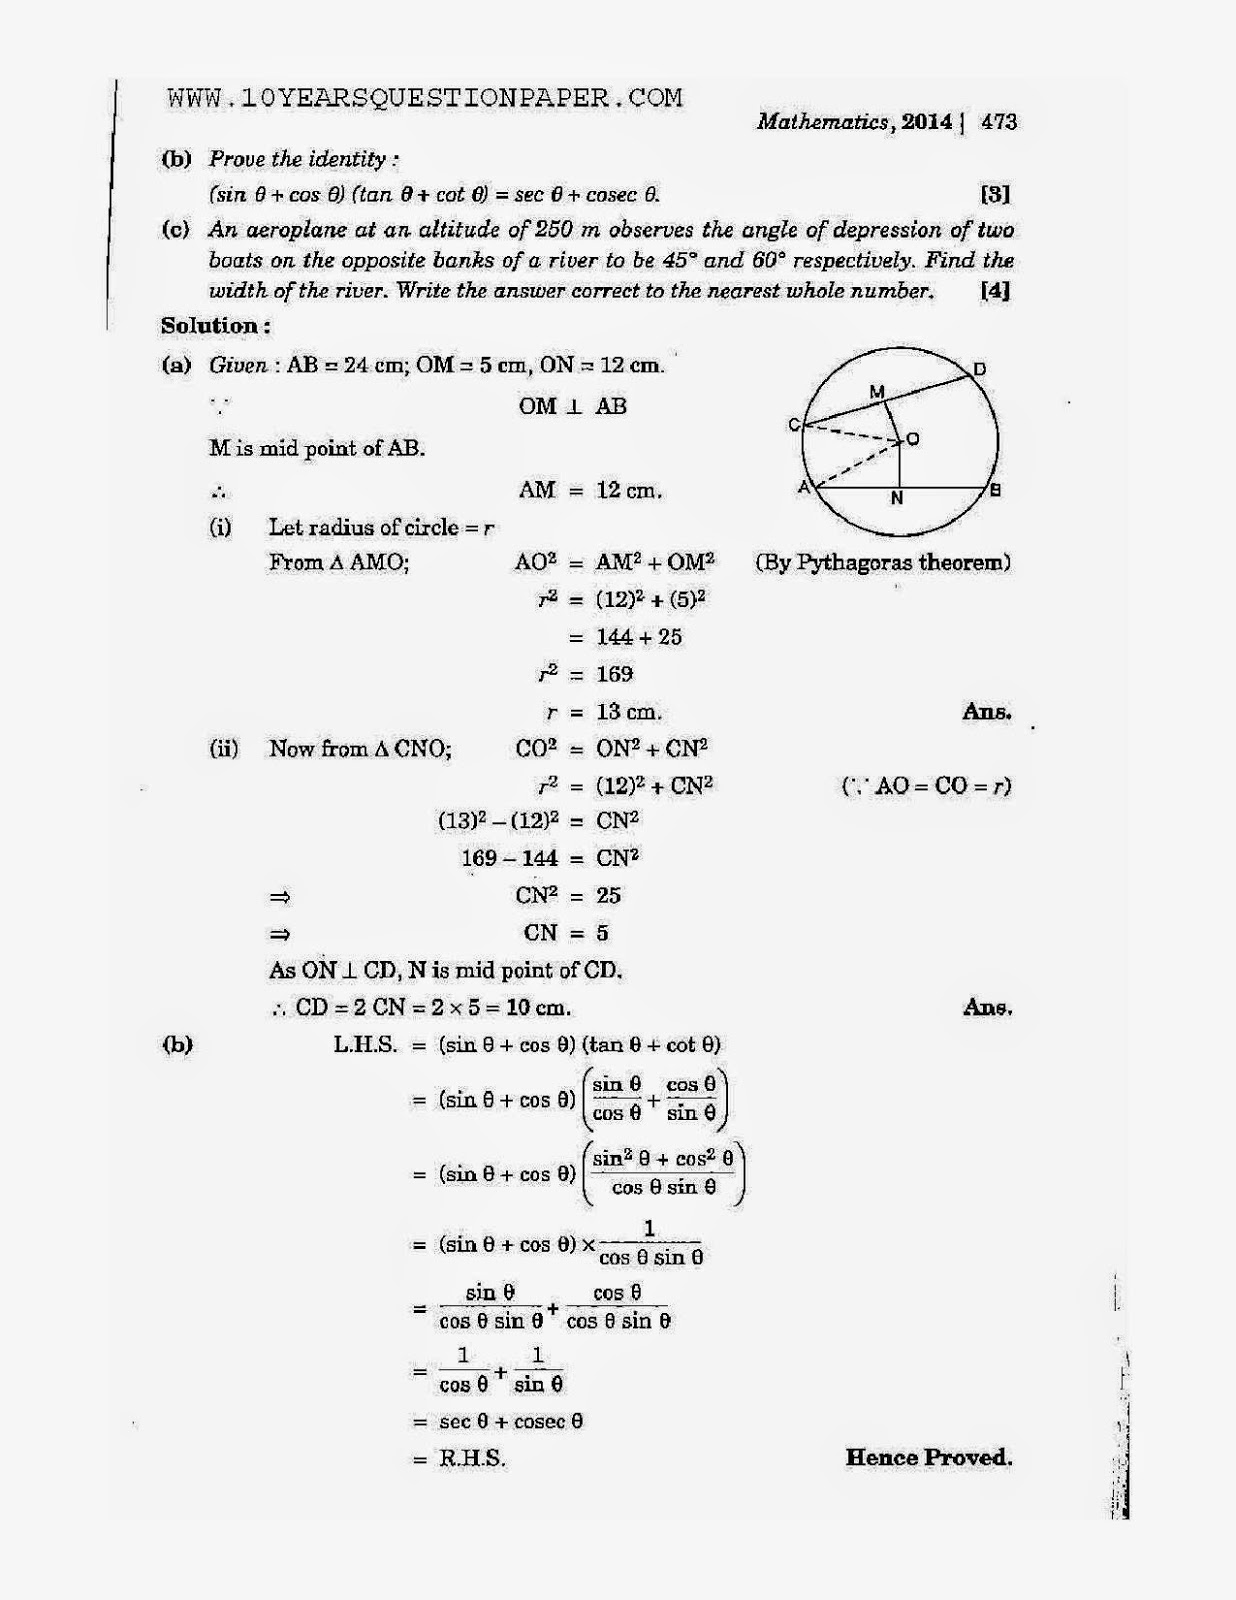 ICSE Maths 2014 - Solved Question Paper Class 10